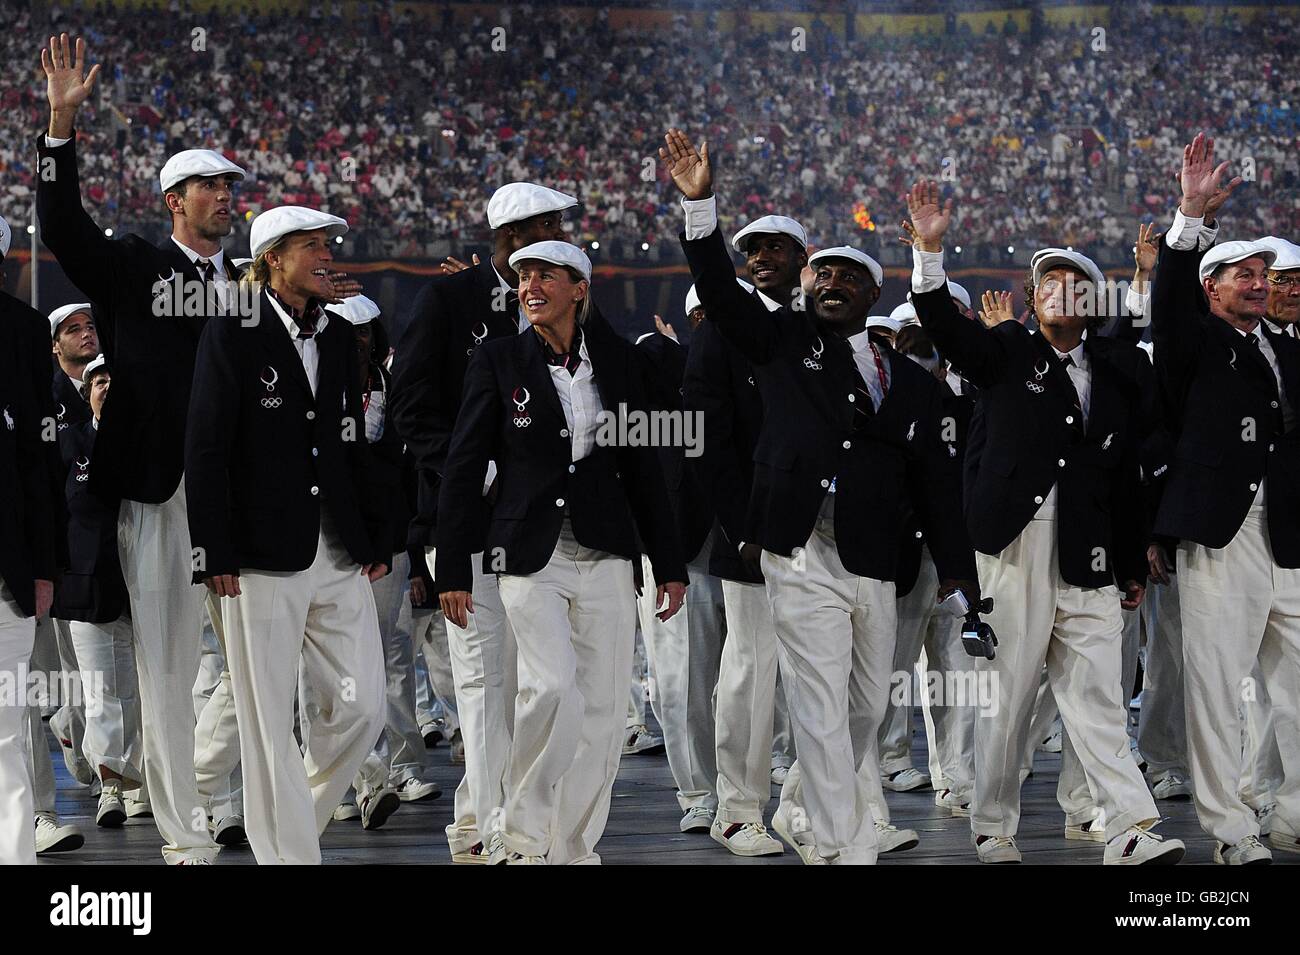 Olympics - Beijing Olympic Games 2008 - Opening Ceremony. The USA team during the 2008 Olympic Games in Beijing. Stock Photo